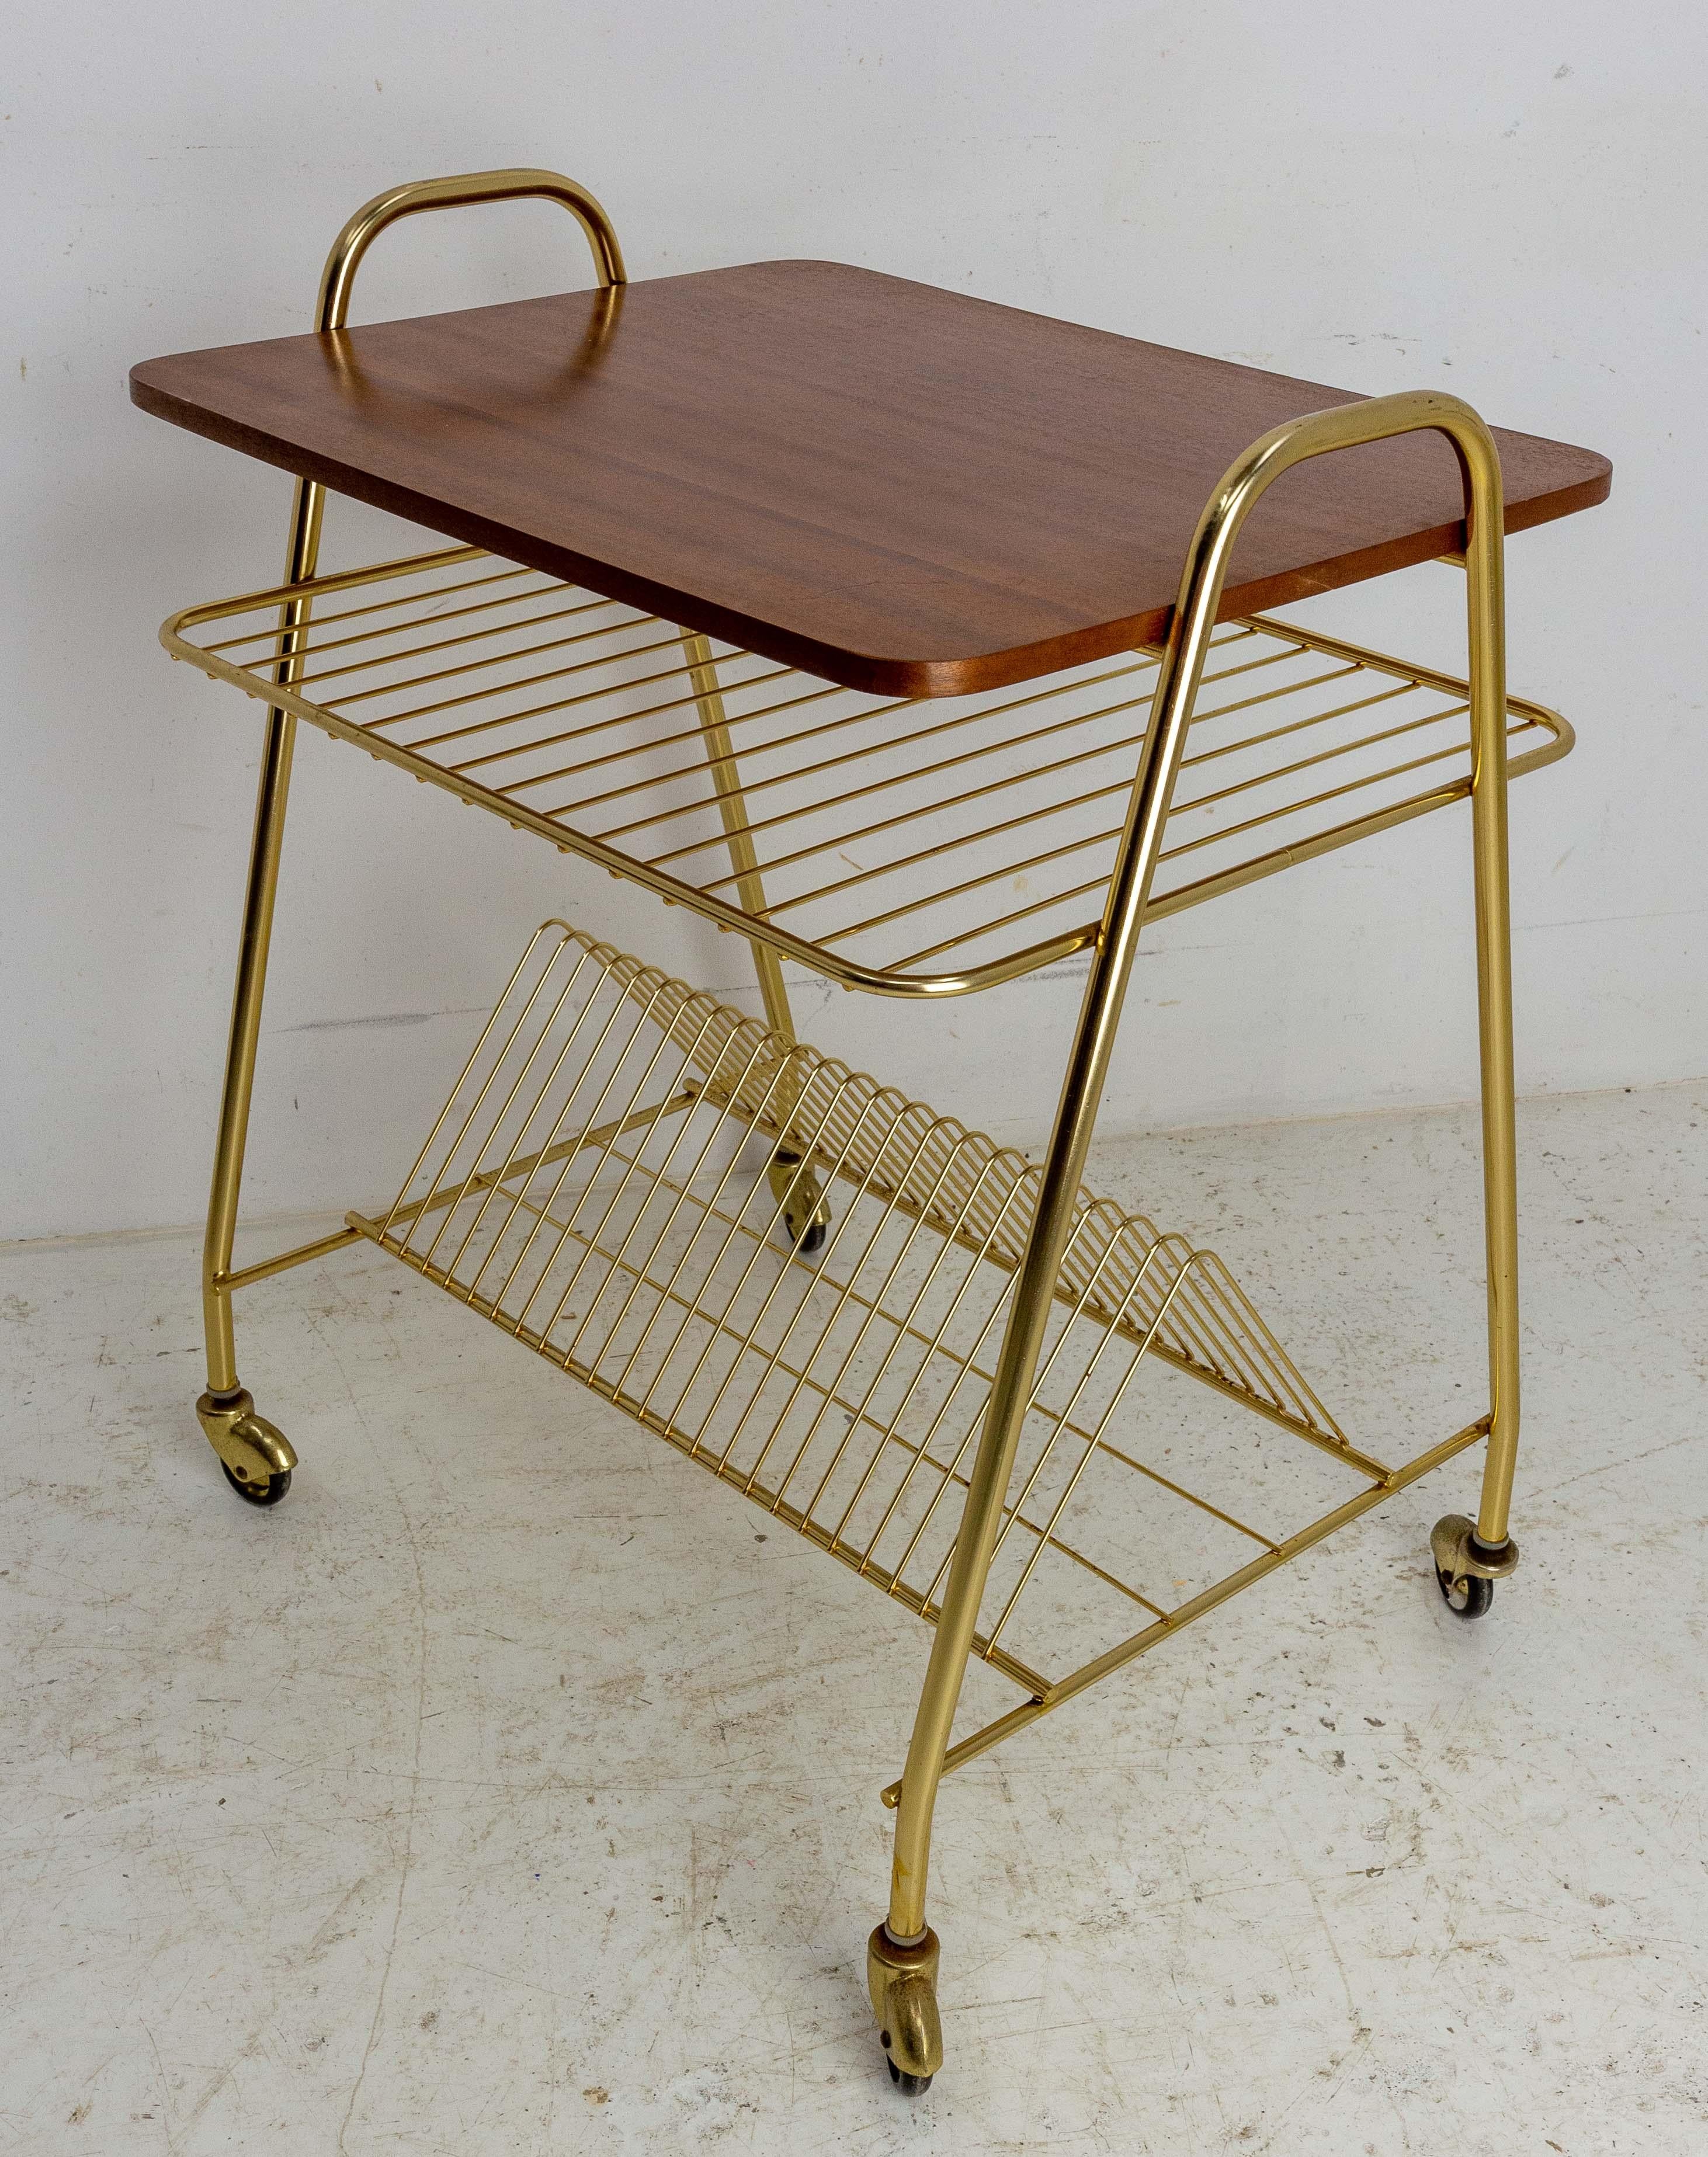 20th Century French Iroko Golden Chrome Table Trolley Console Desserte with Wheels, 1960 For Sale